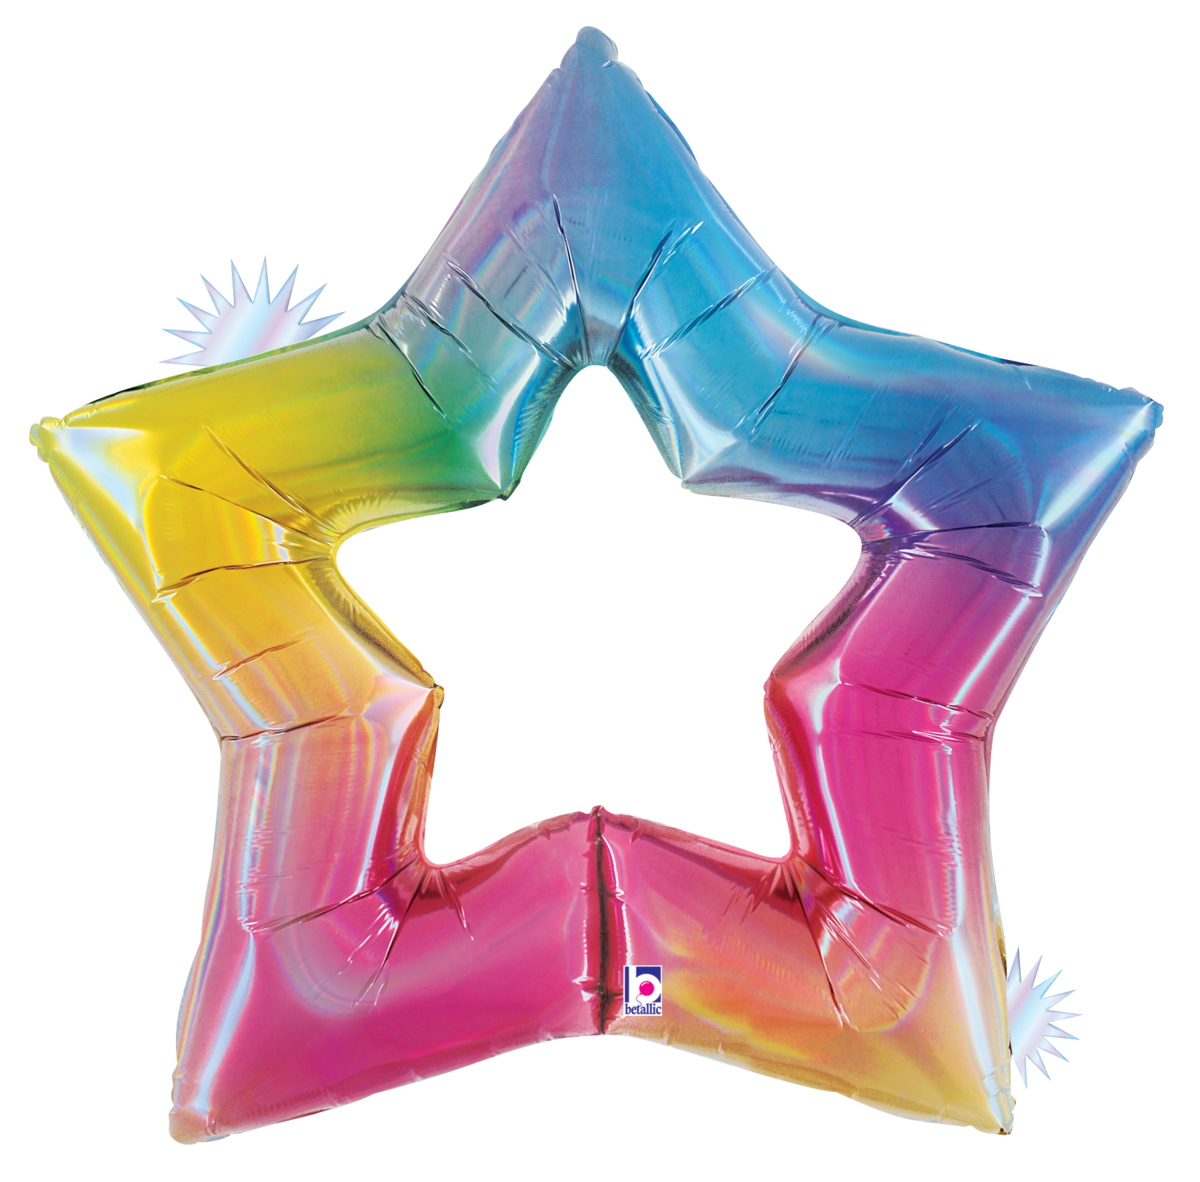 25138_LinkingStar_OpalRainbow1200x1200.png